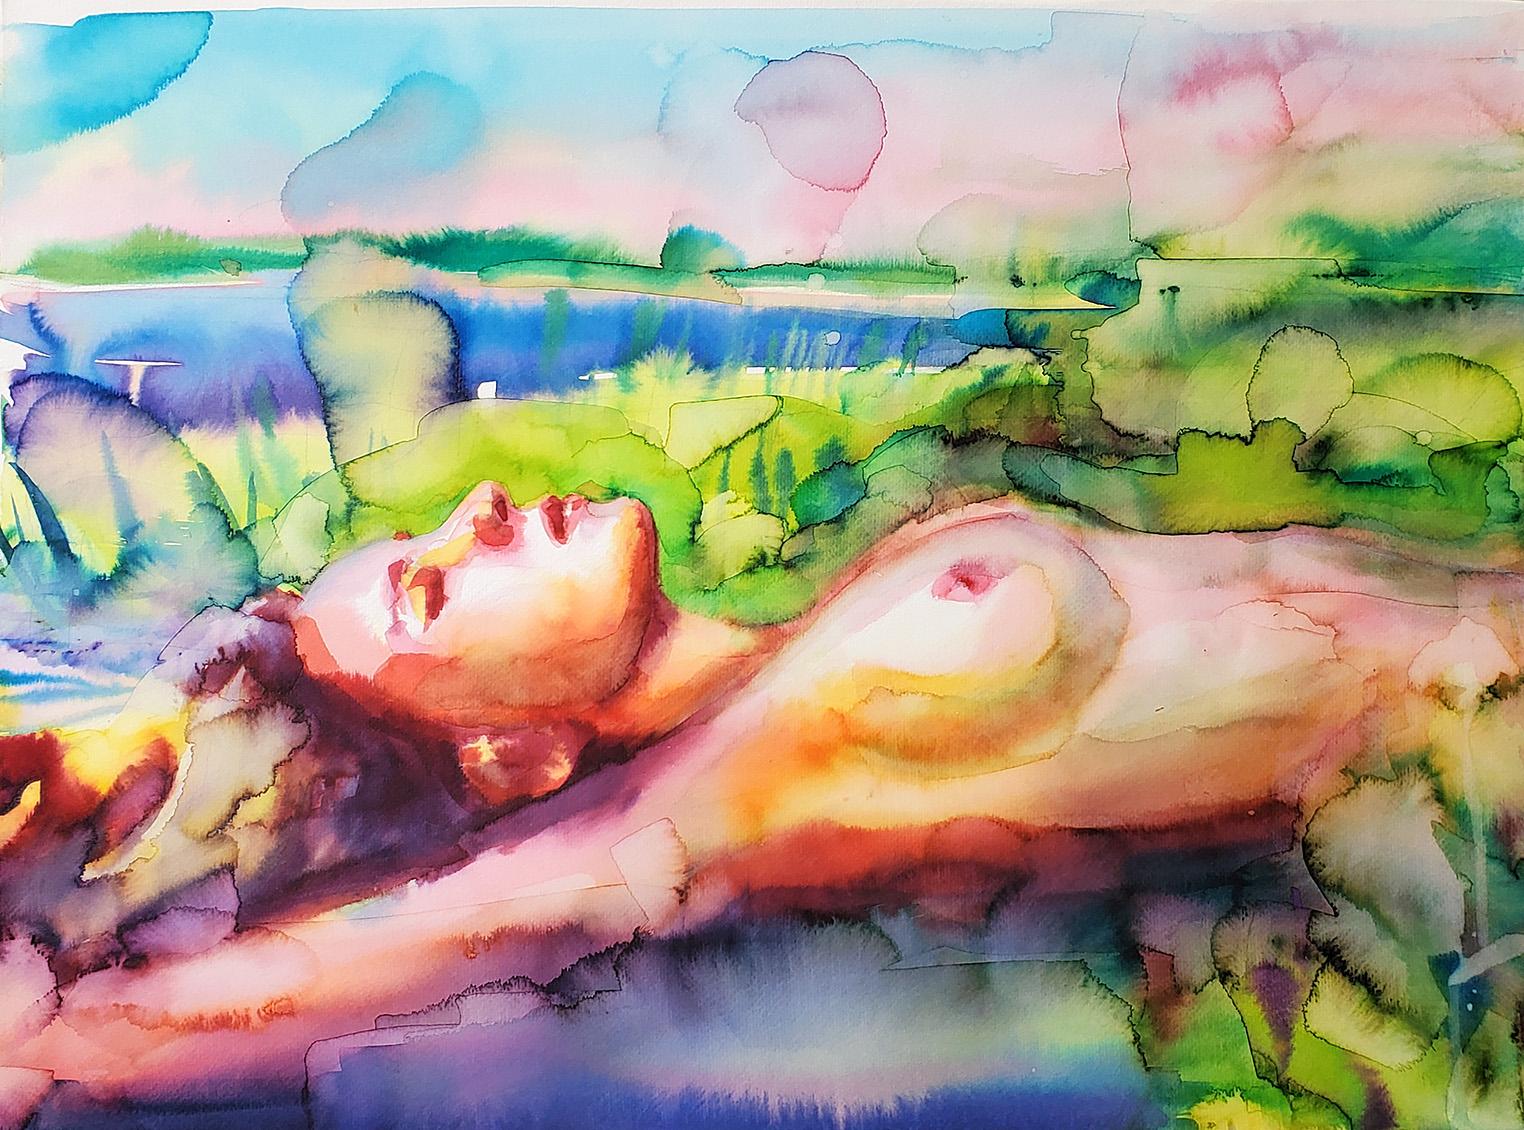  Elena Chestnykh Portrait - "Dreaming by the River" Figurative Drawing, Nude, Vibrant, Watercolor, Framed